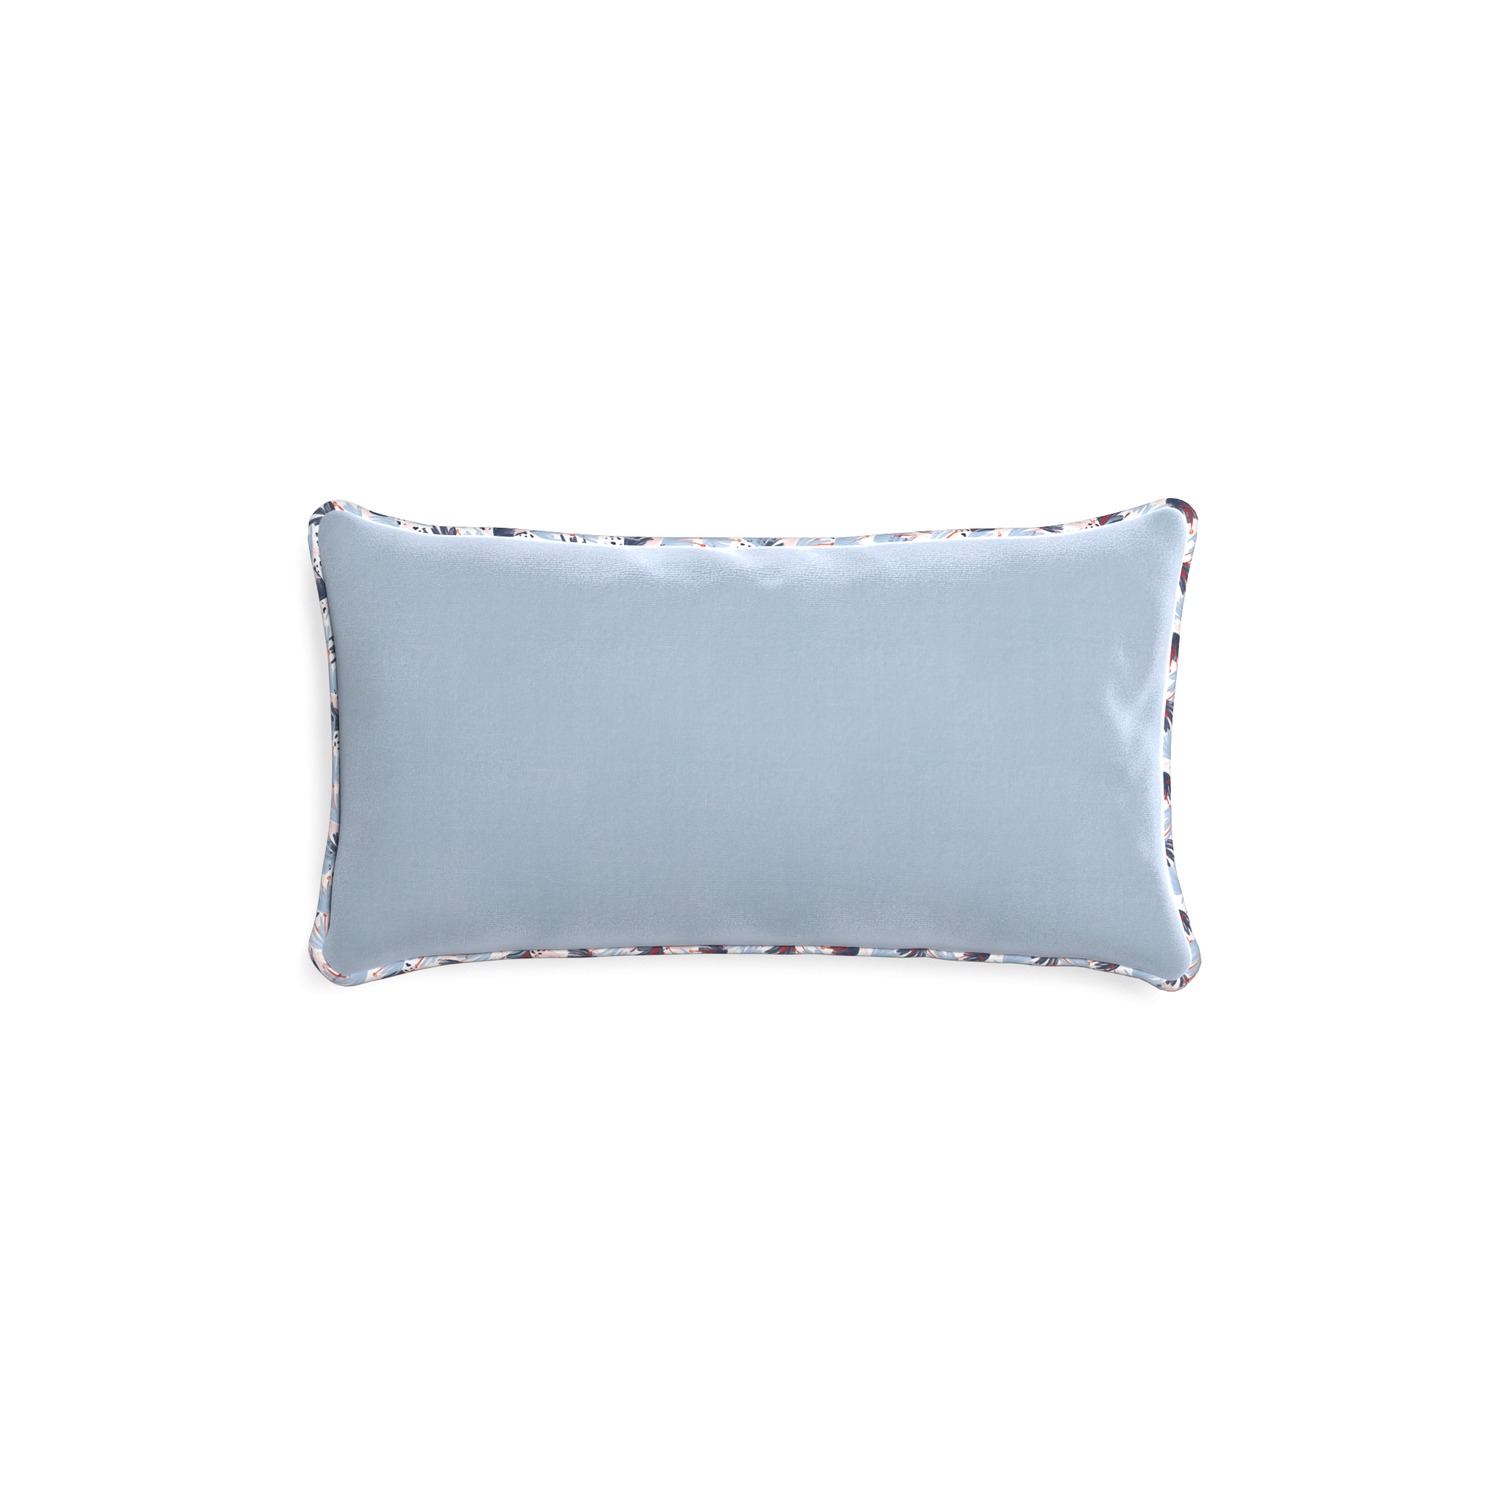 rectangle light blue velvet pillow with red and blue piping